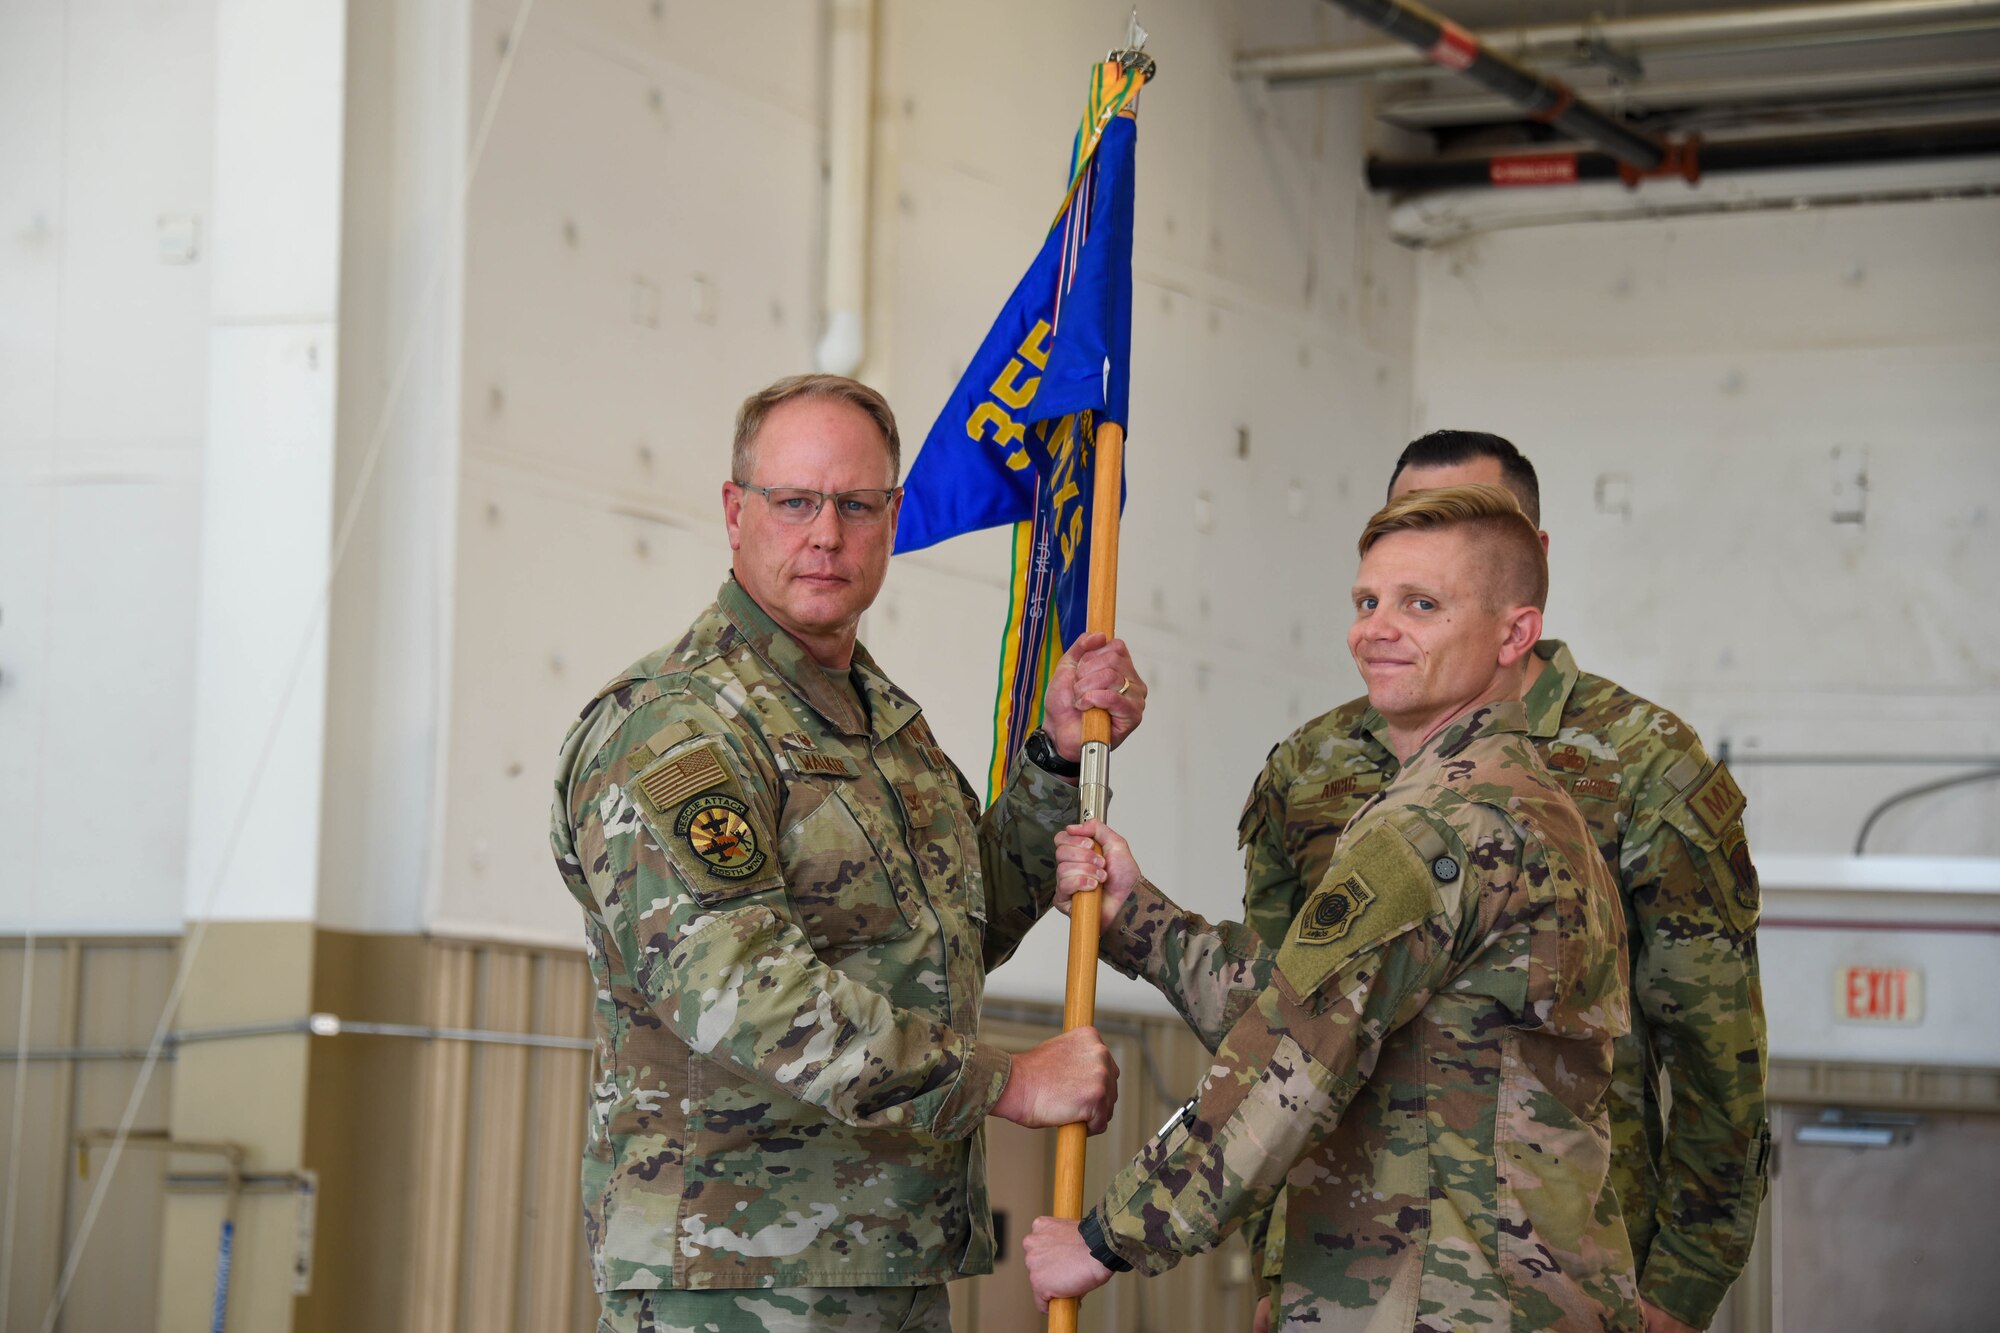 A photo of two Airmen holding a guidon.